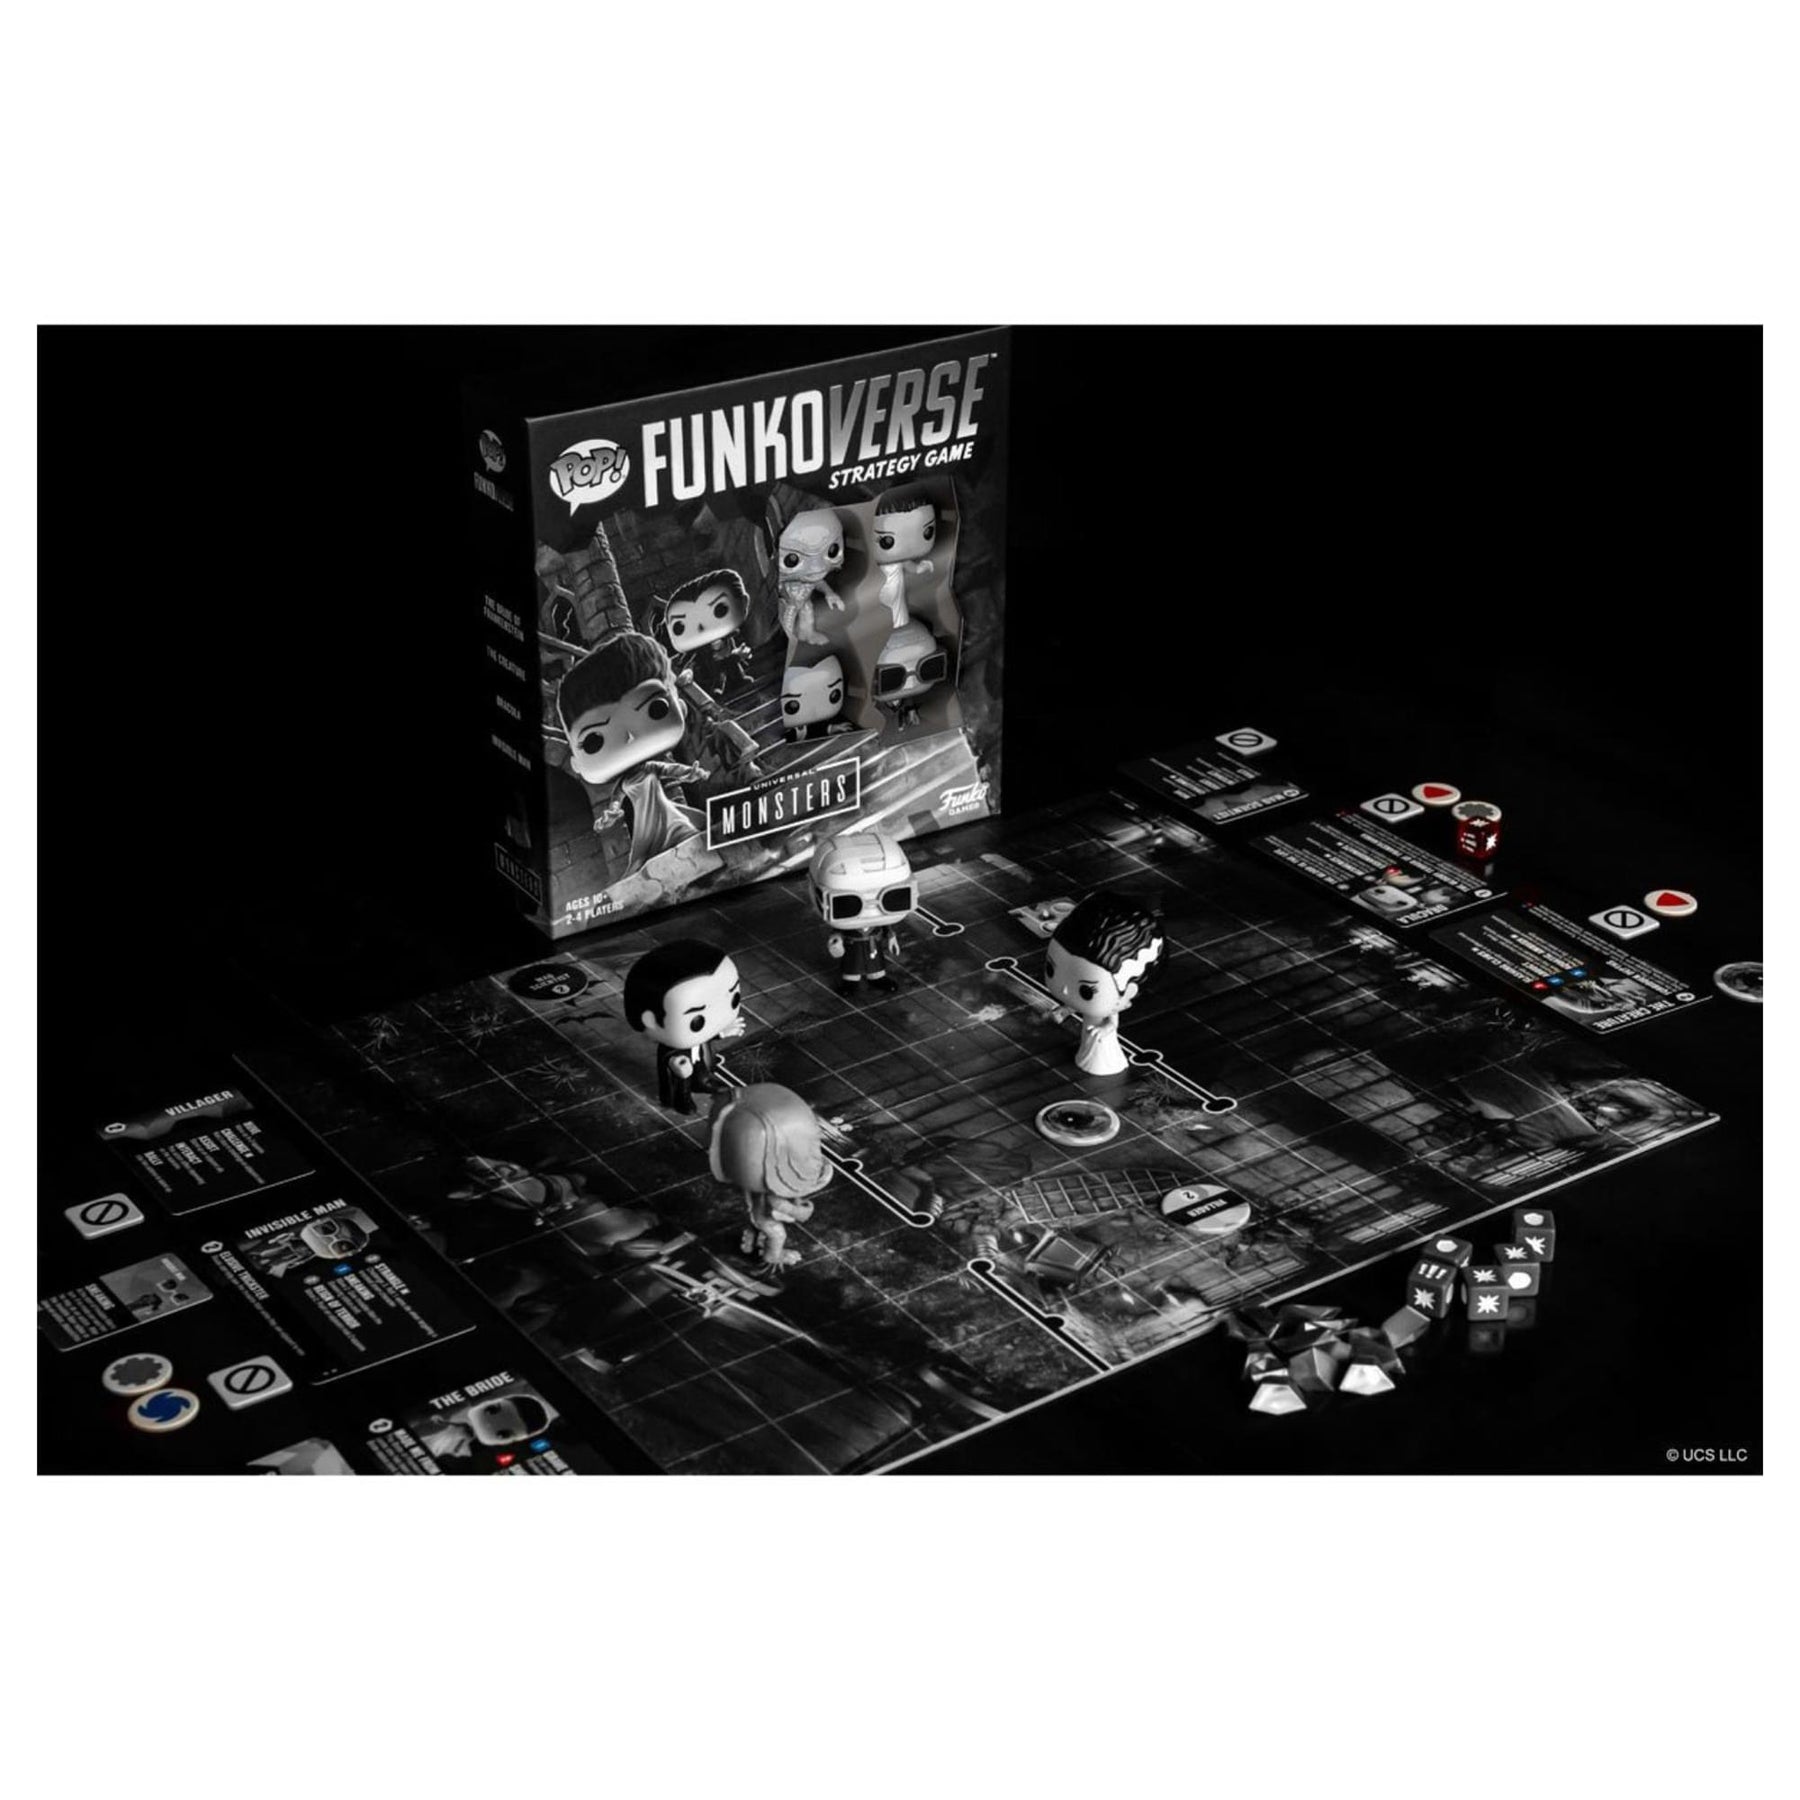 Universal Monsters Funko POP Funkoverse Strategy Game